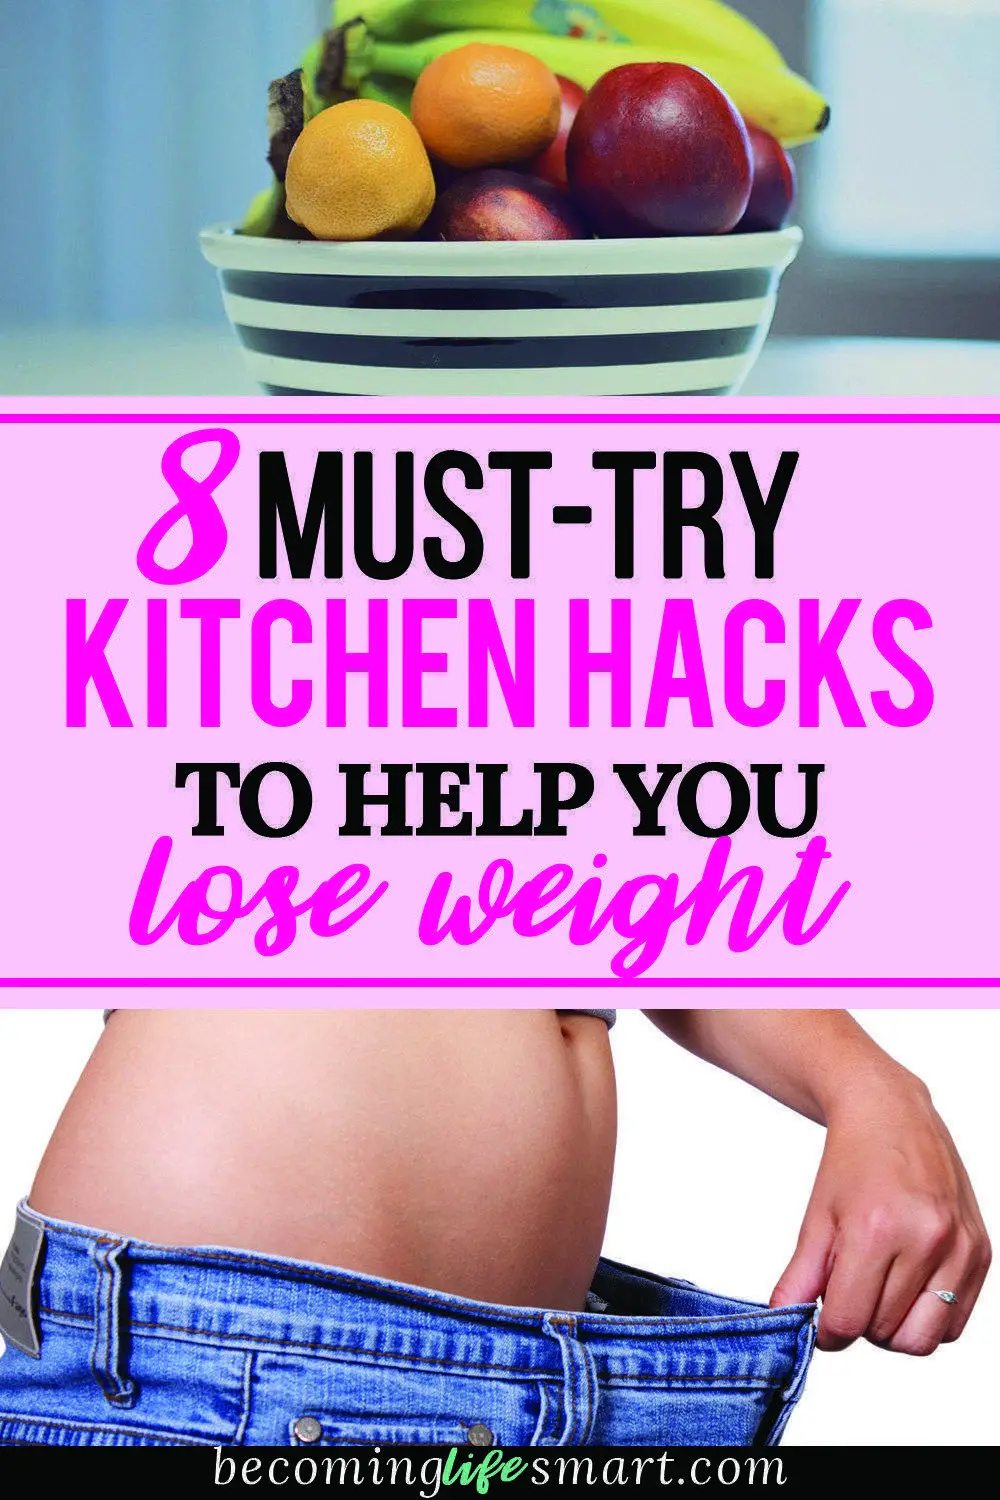 Pin on Lose weight quick tips